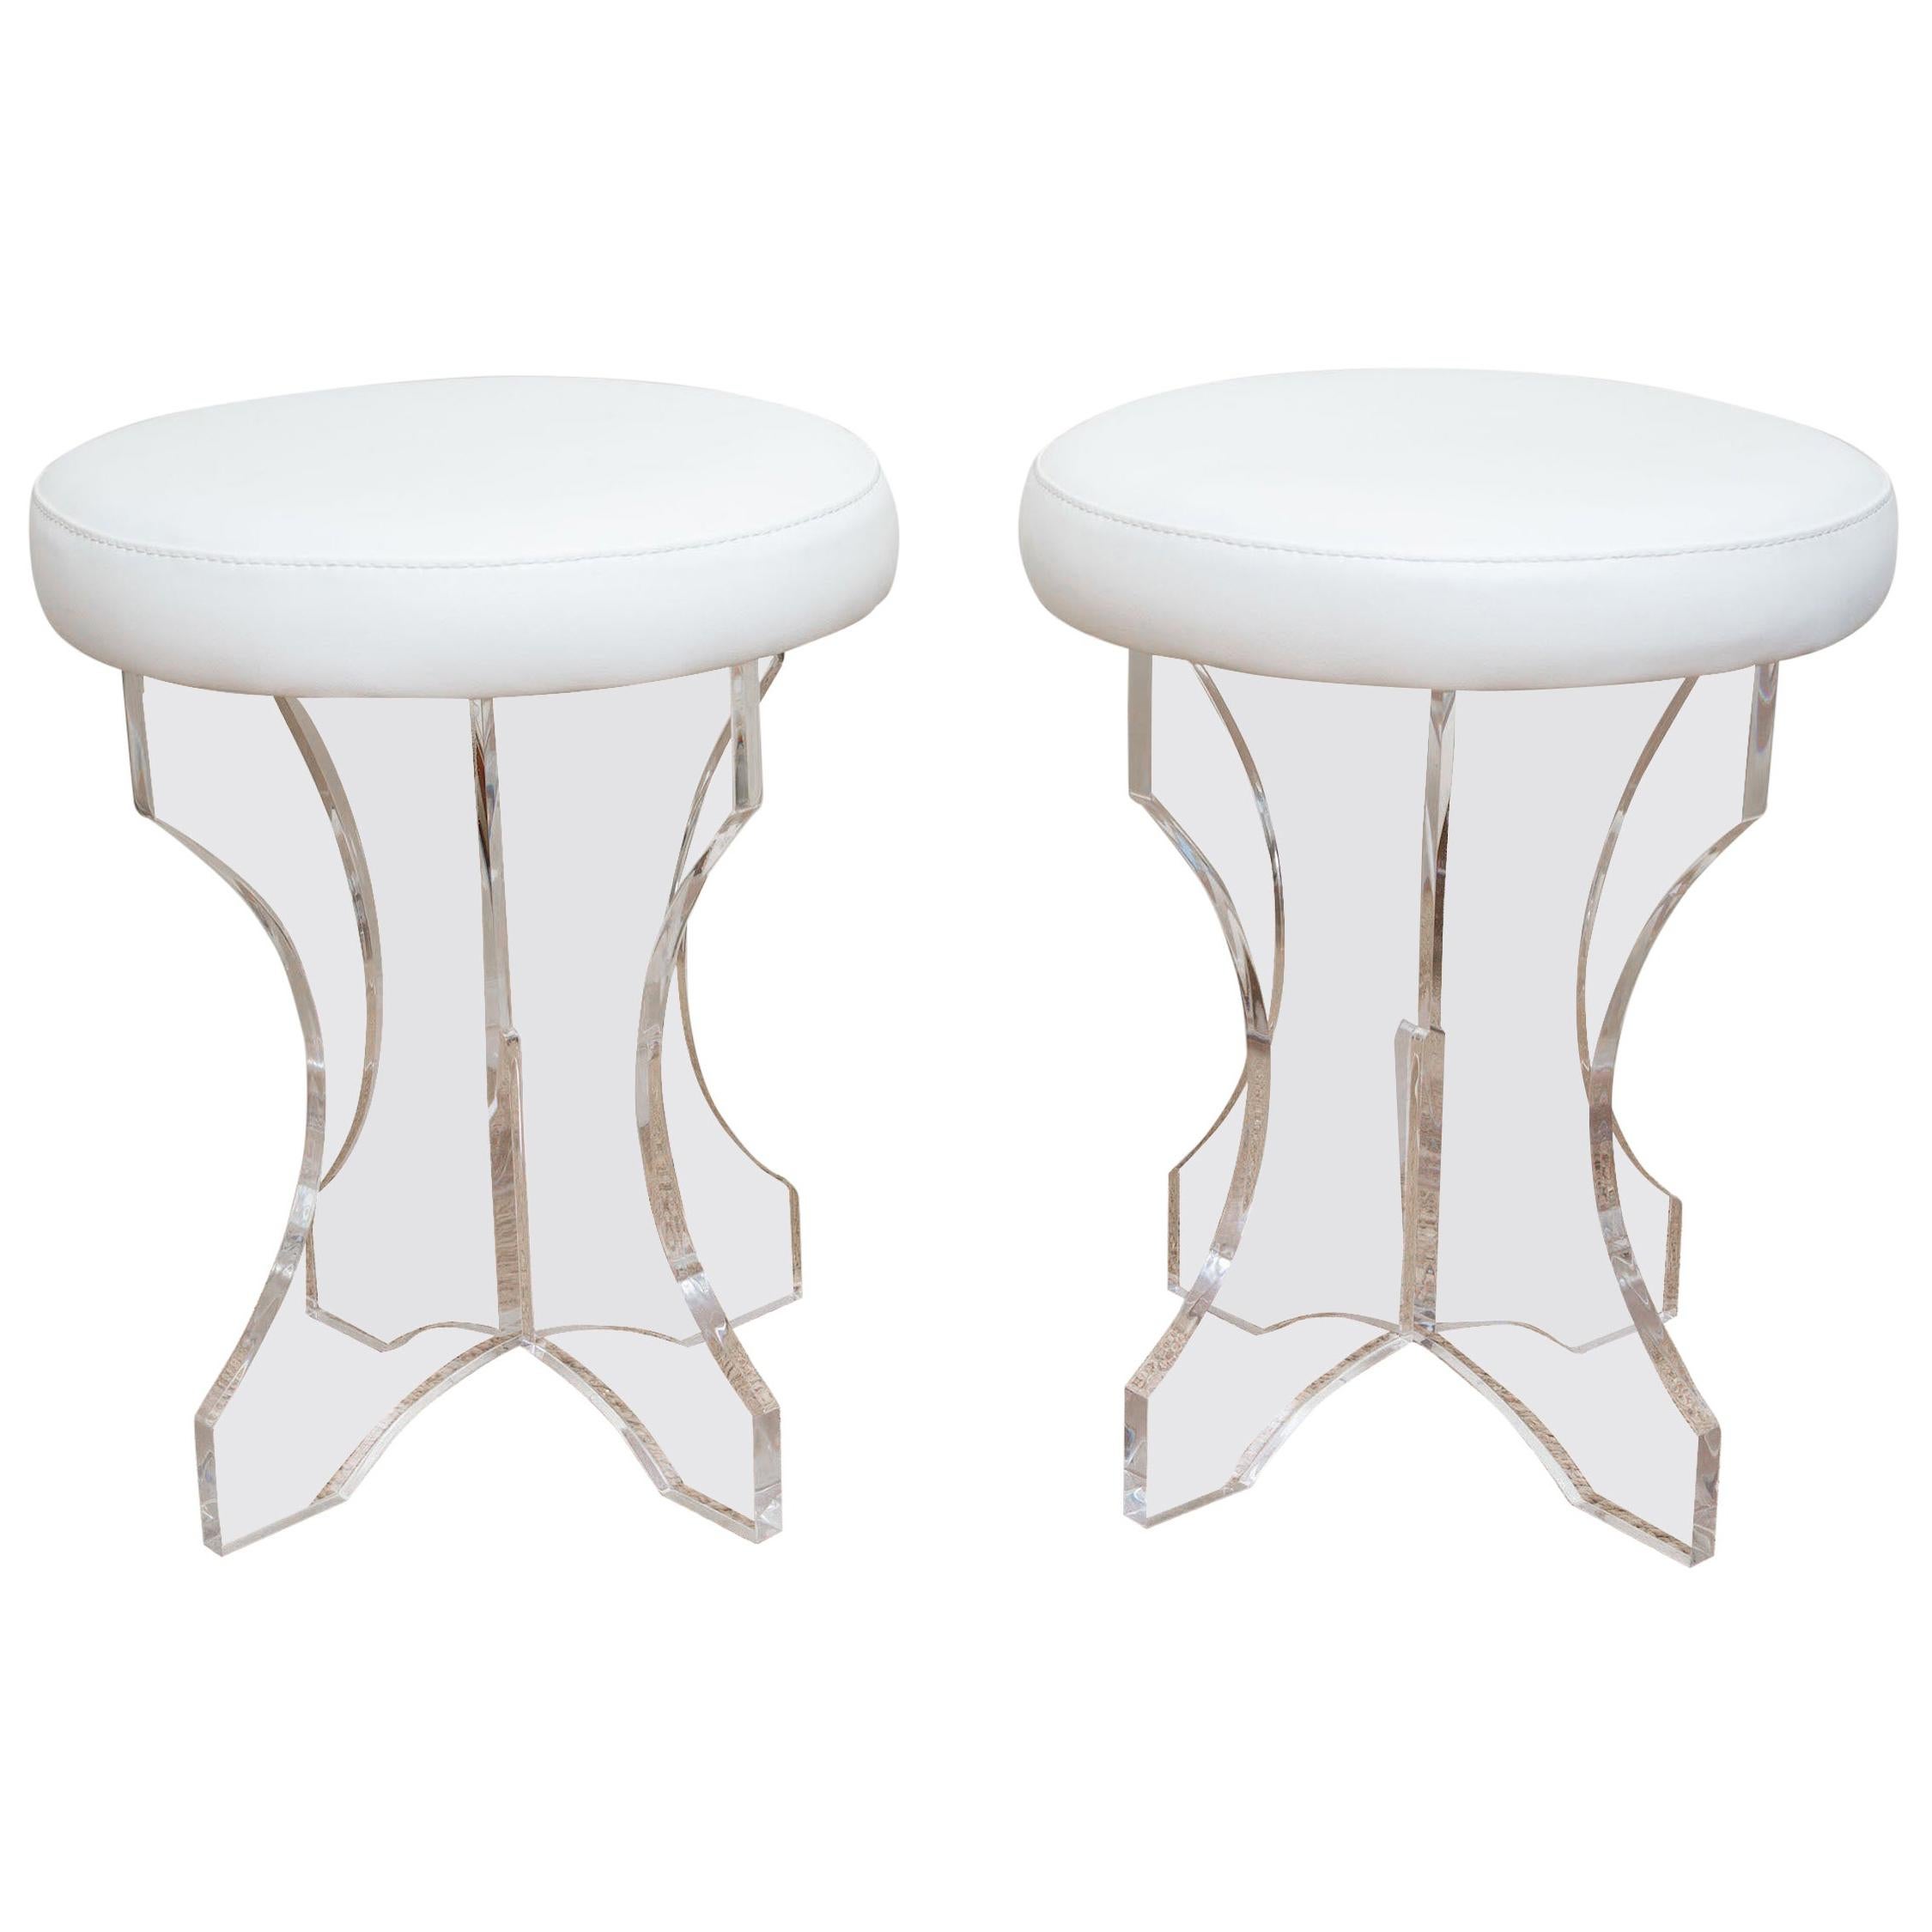 Lucite and White Vinyl Upholstered Vanity Stools Pair of 80's